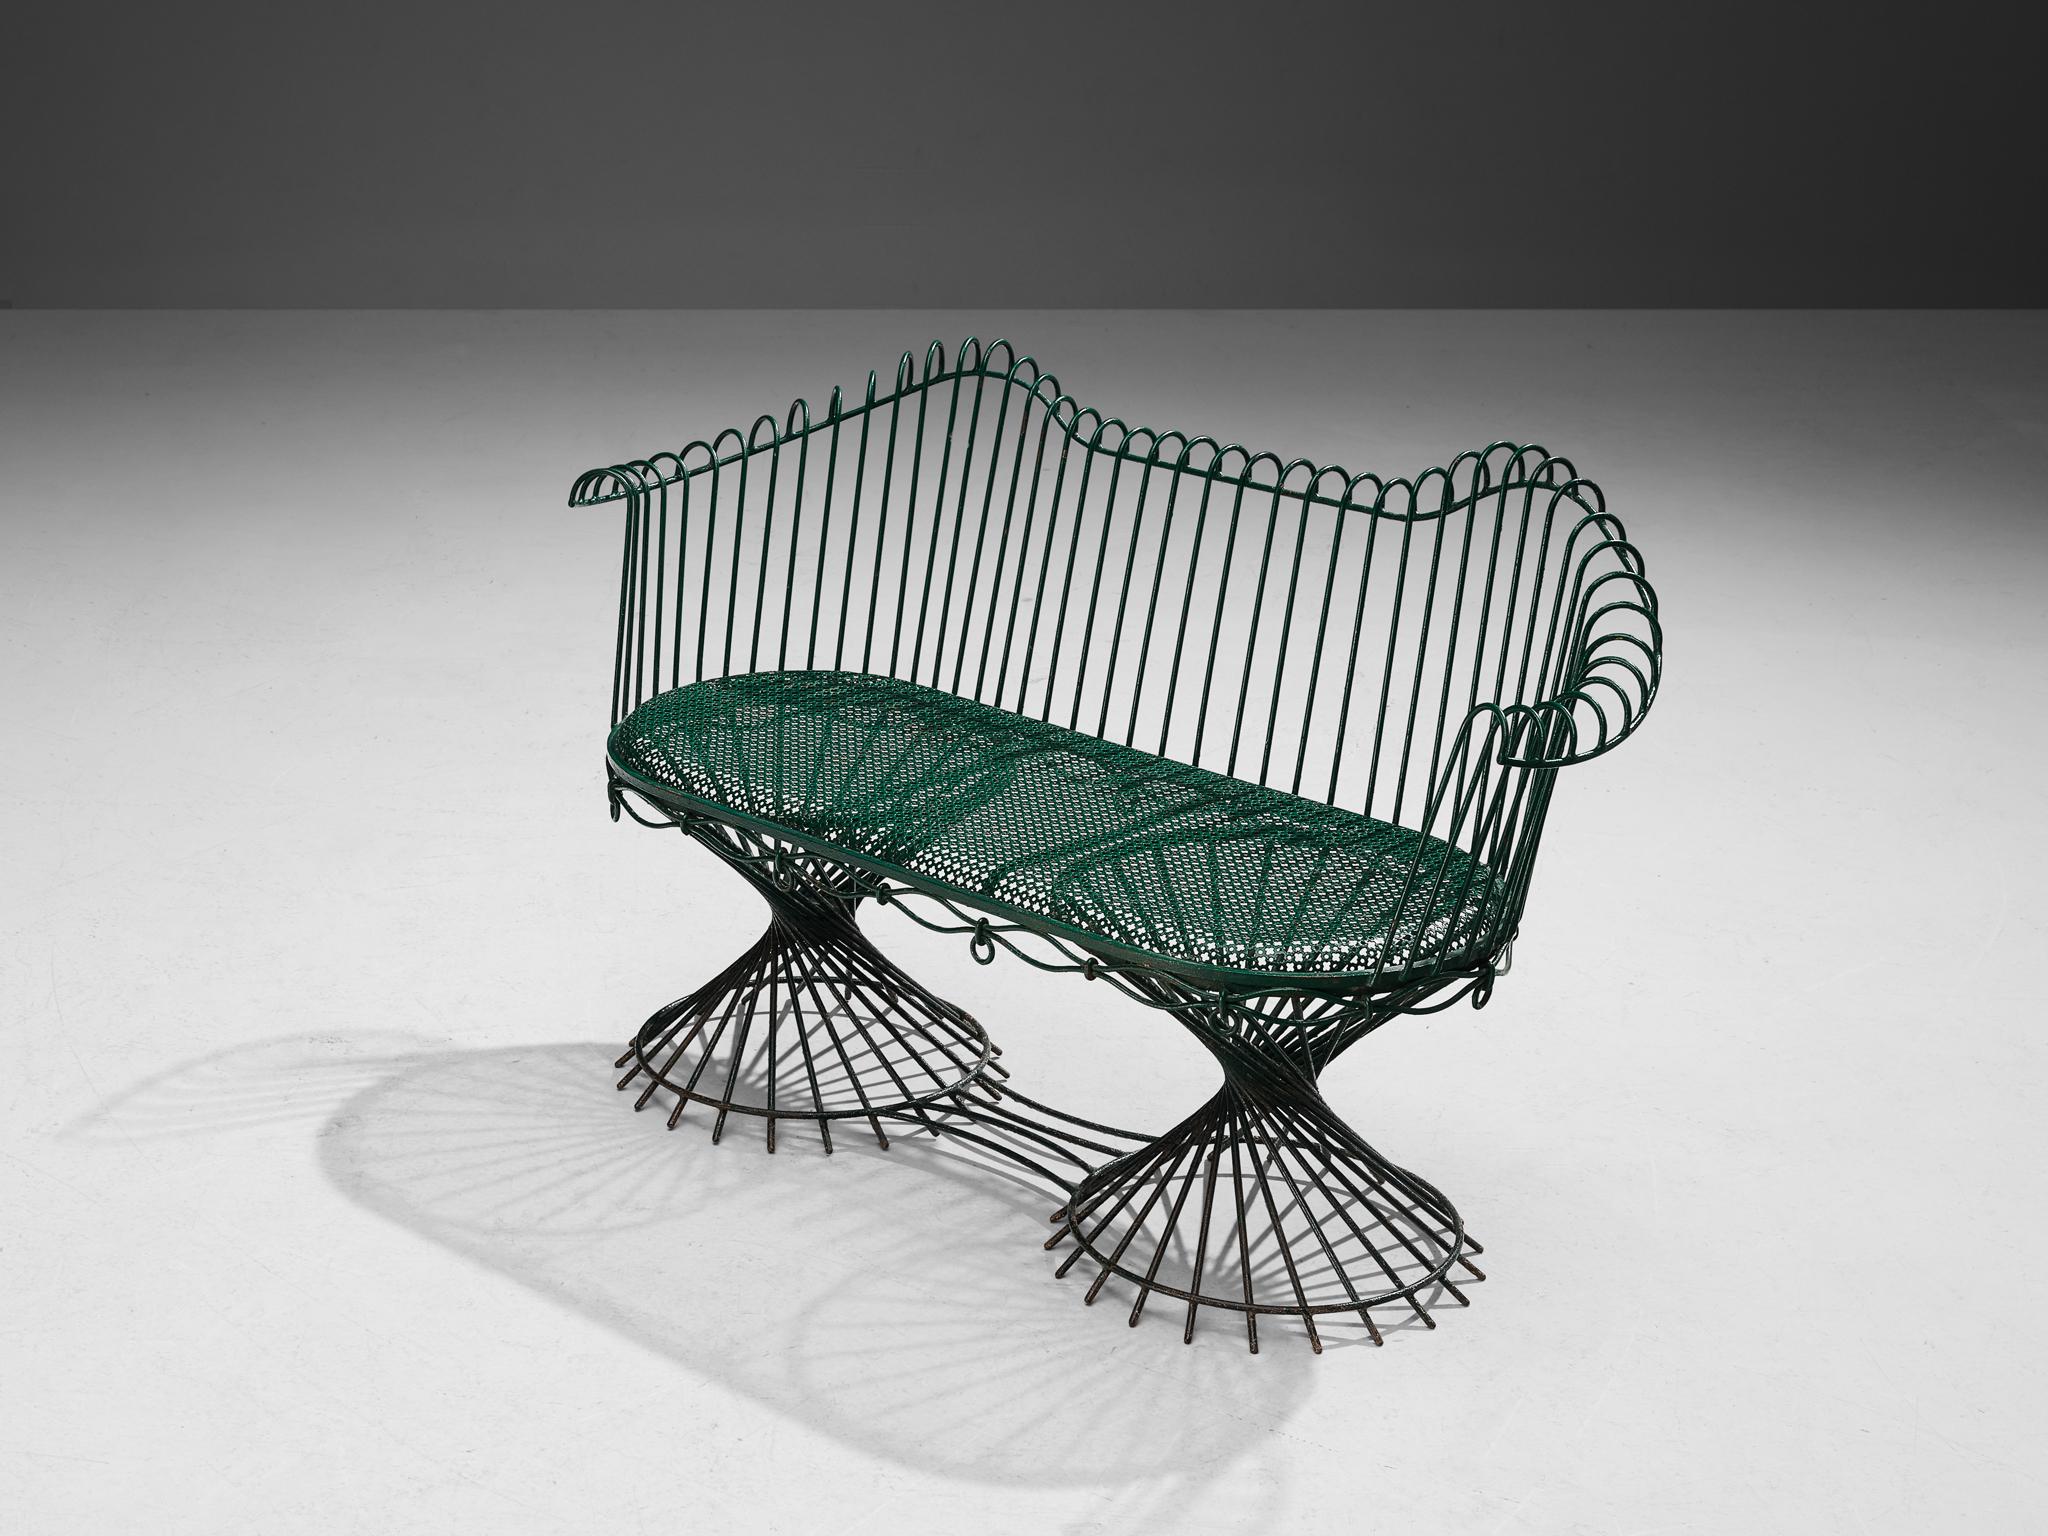 Mathieu Matégot, bench model 'Anthéor', lacquered wrought iron, France, 1951

This rare bench is designed by the French artist Mathieu Matégot. The designer (1910-2001) was born in Hungary and settled in Paris in 1931. As an autodidact, he submerged